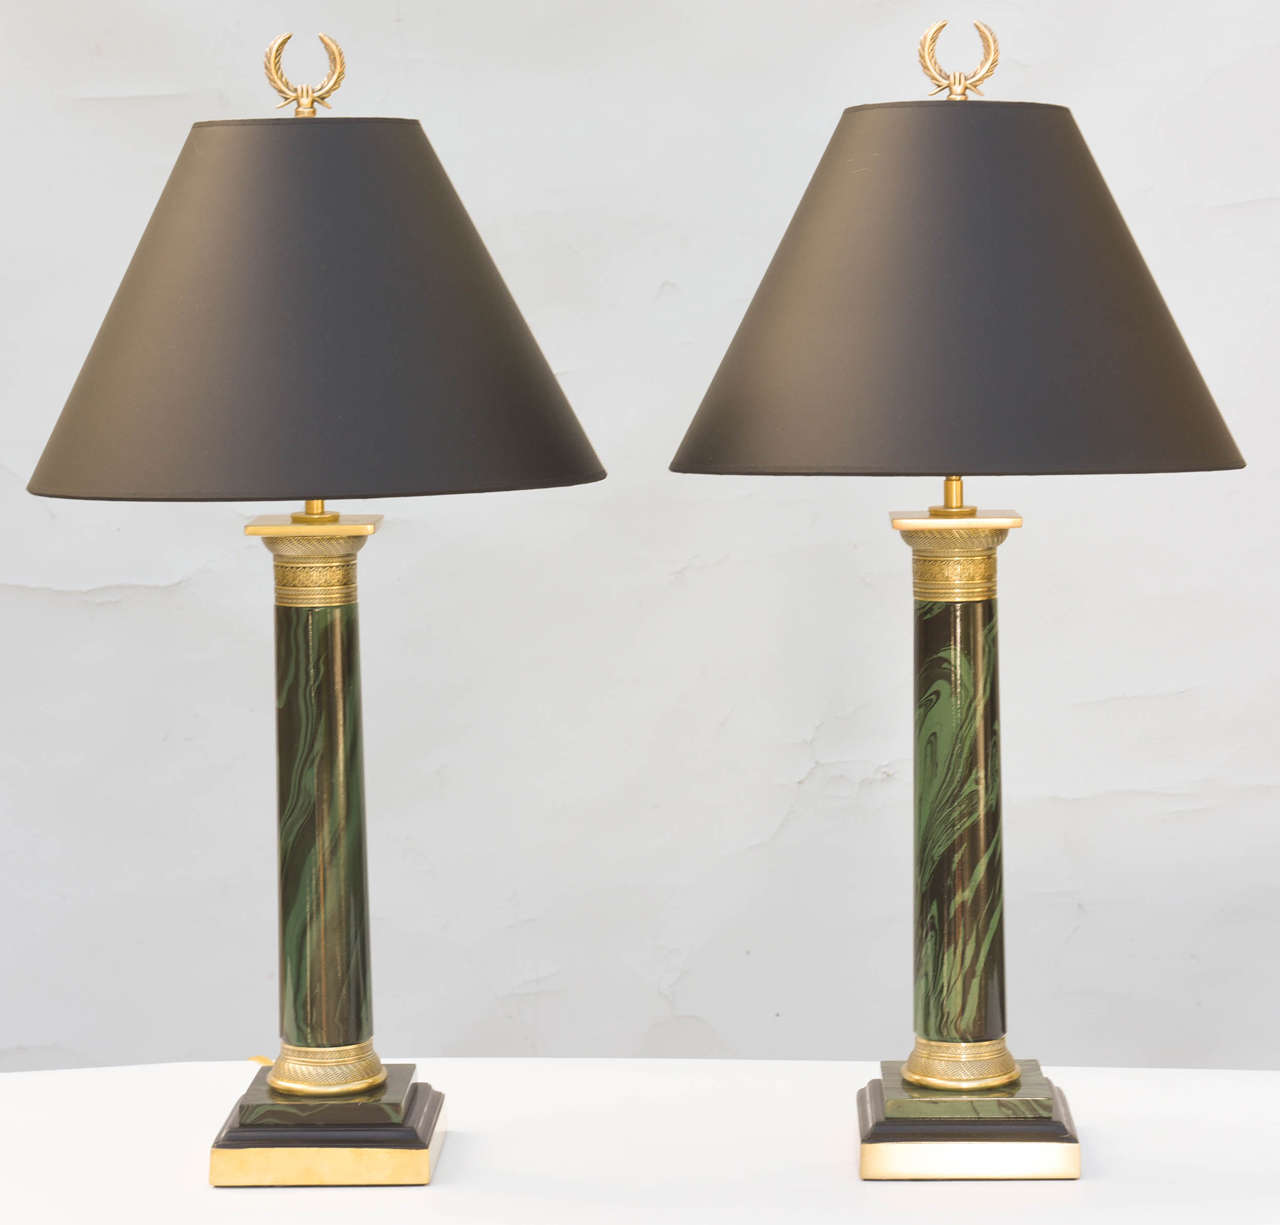 Pair of lamps, of metal, column form, painted in faux malachite, having chased brass capital and collar, on square graduated bases. Shown with black file shades (not included).

Stock ID: D9237